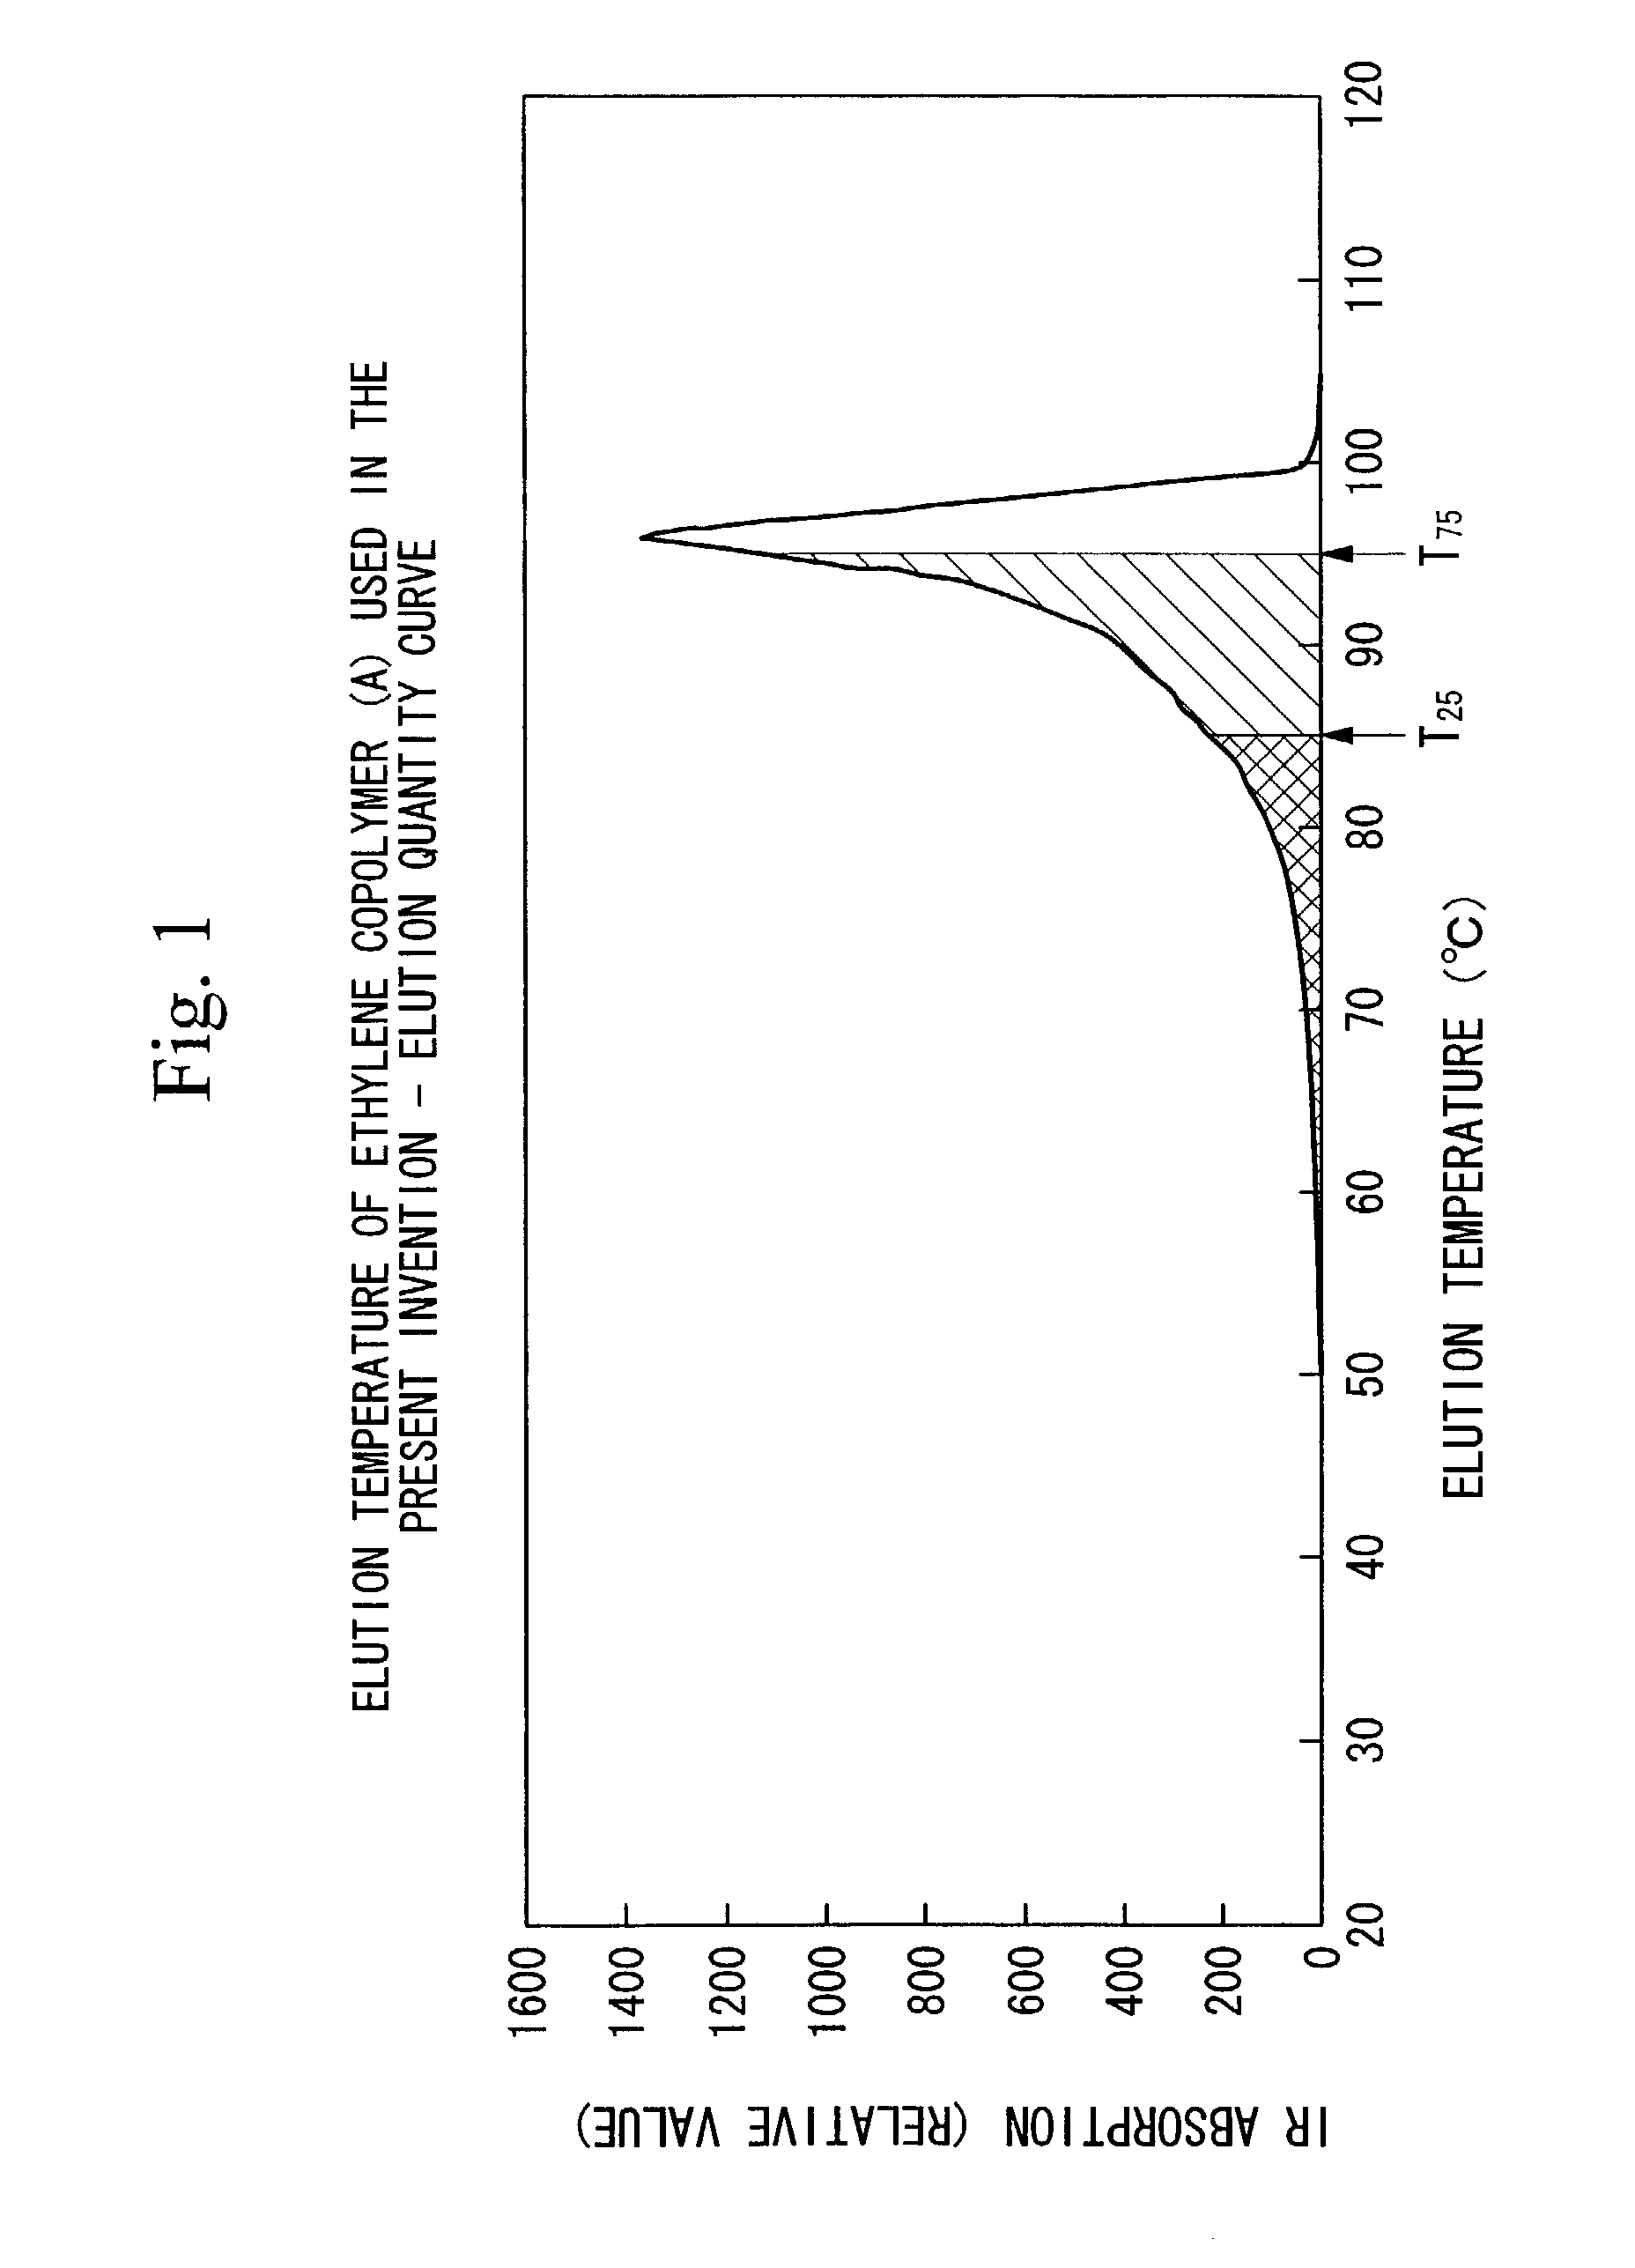 Adhesive resin composition and multi-layer laminated structure using the same